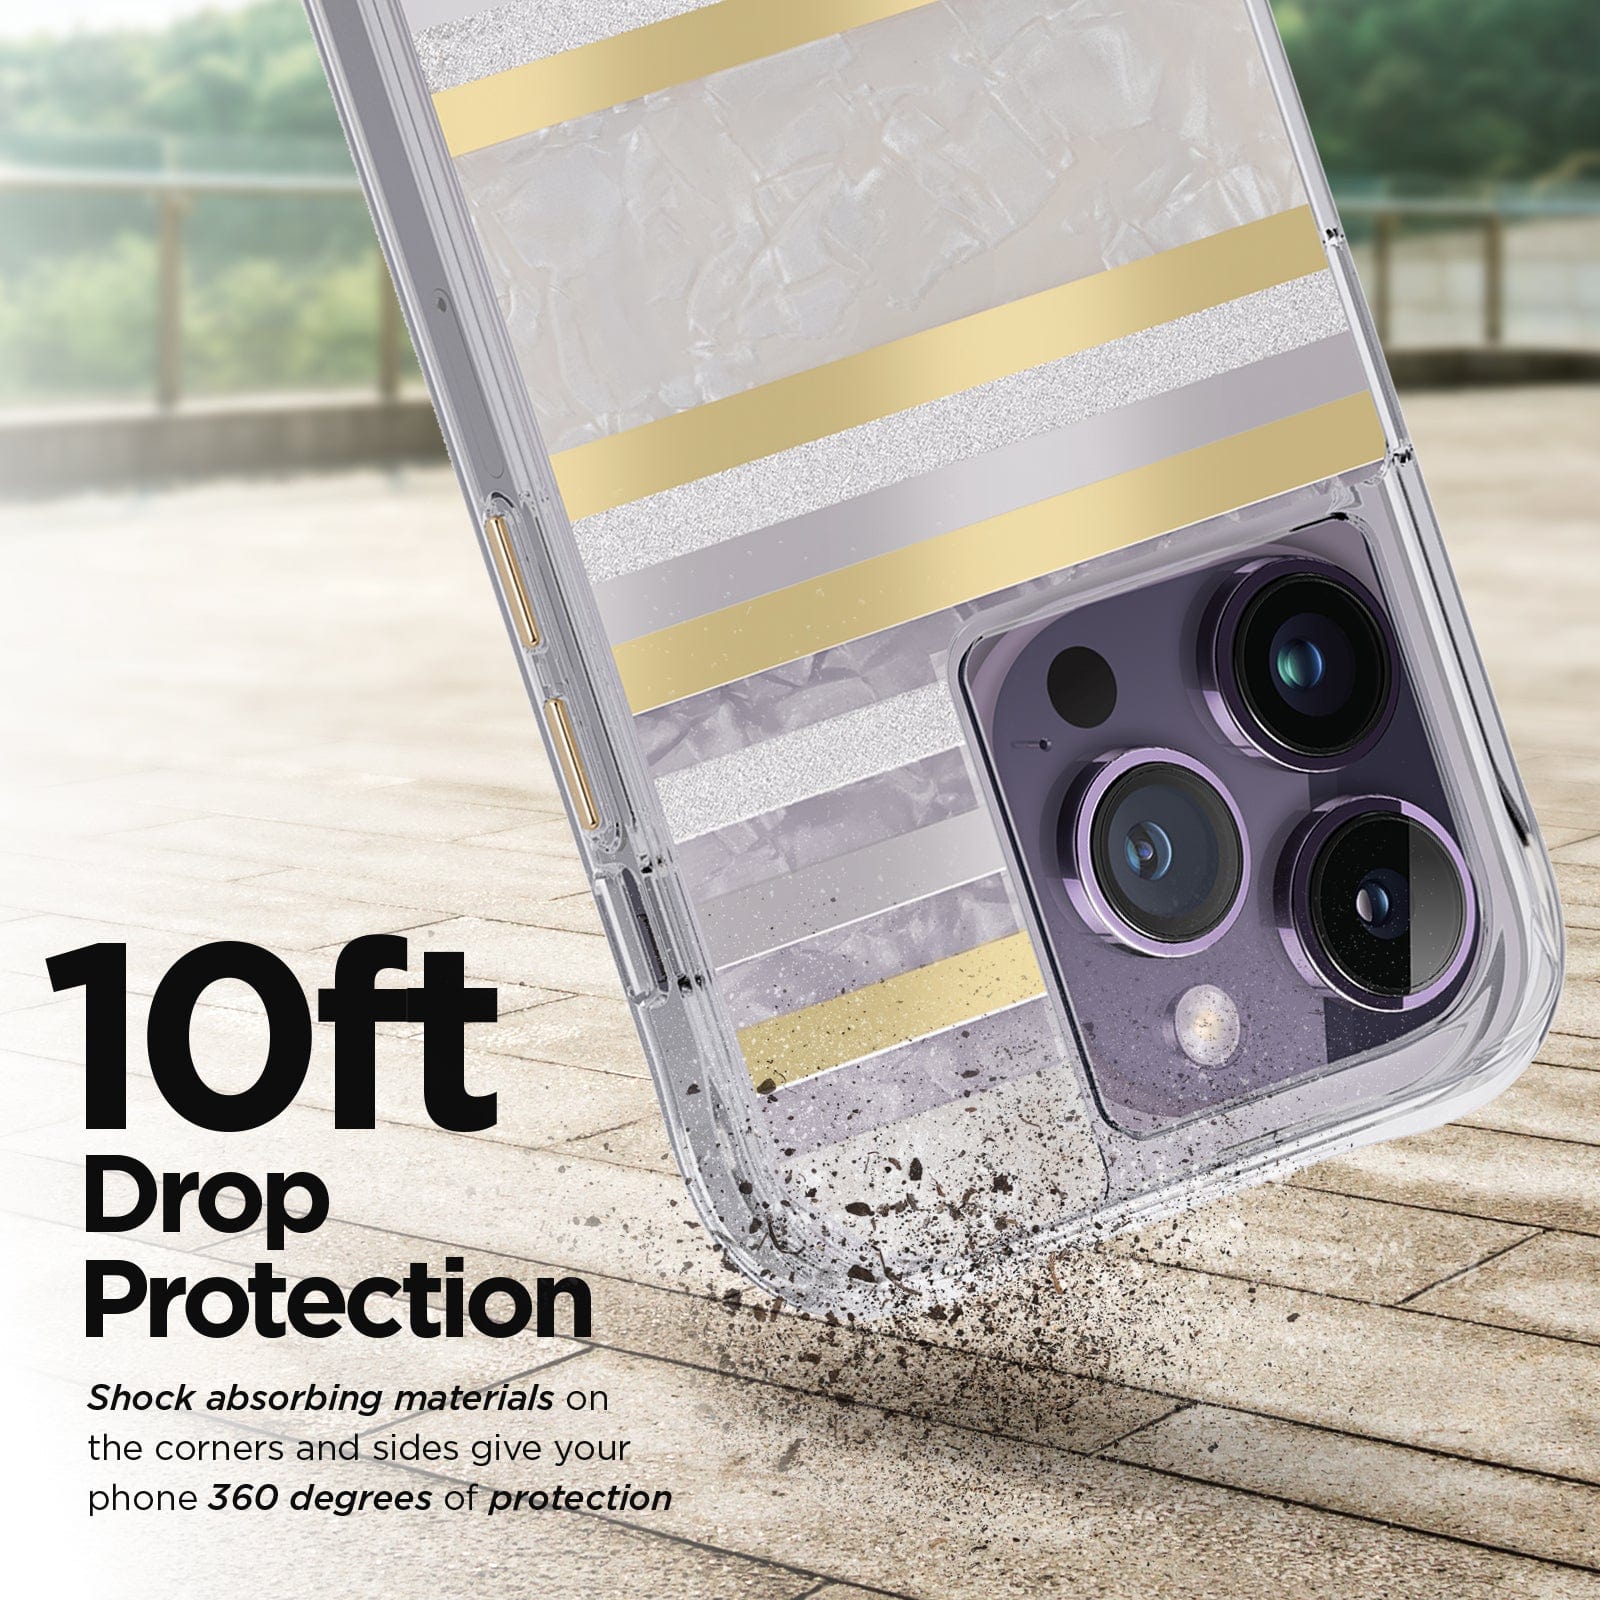 10FT DROP PROTECTION. SHOCK ABSORBING MATERIALS ON THE CORNERS AND SIDES GIVE YOUR PHONE 360 DEGREES OF PROTECTION. 